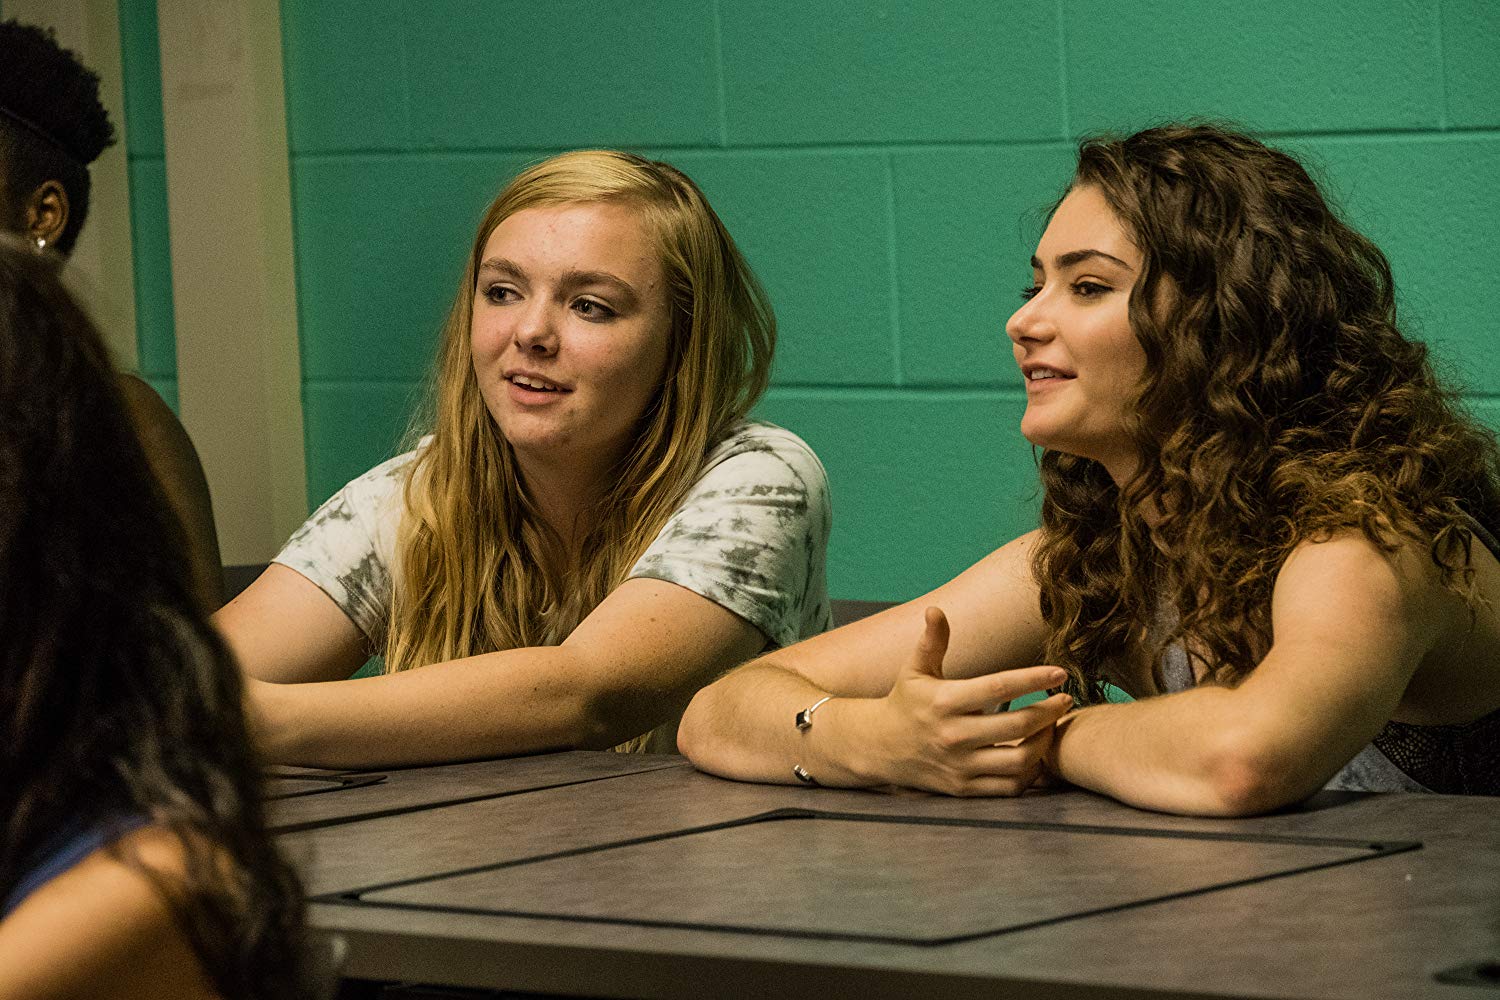 Eighth Grade Review: It's Awkward and Painful, But Incredibly Heartfelt